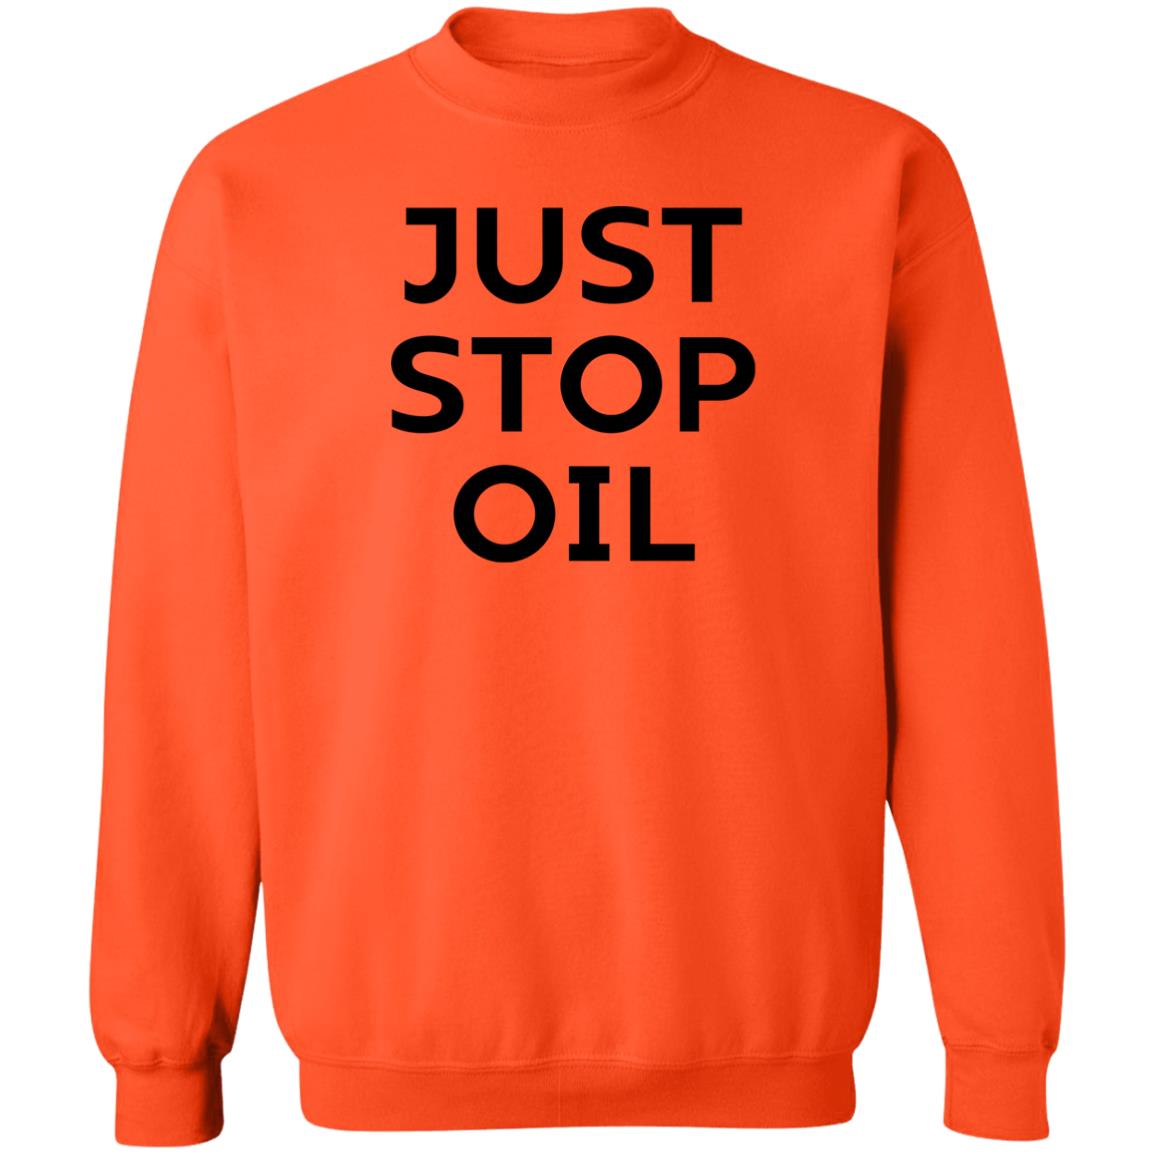 Protesters Have Glued Themselves To A Vincent Van Gogh Painting At London’s Courtauld Gallery Talktv Just Stop Oil Shirt